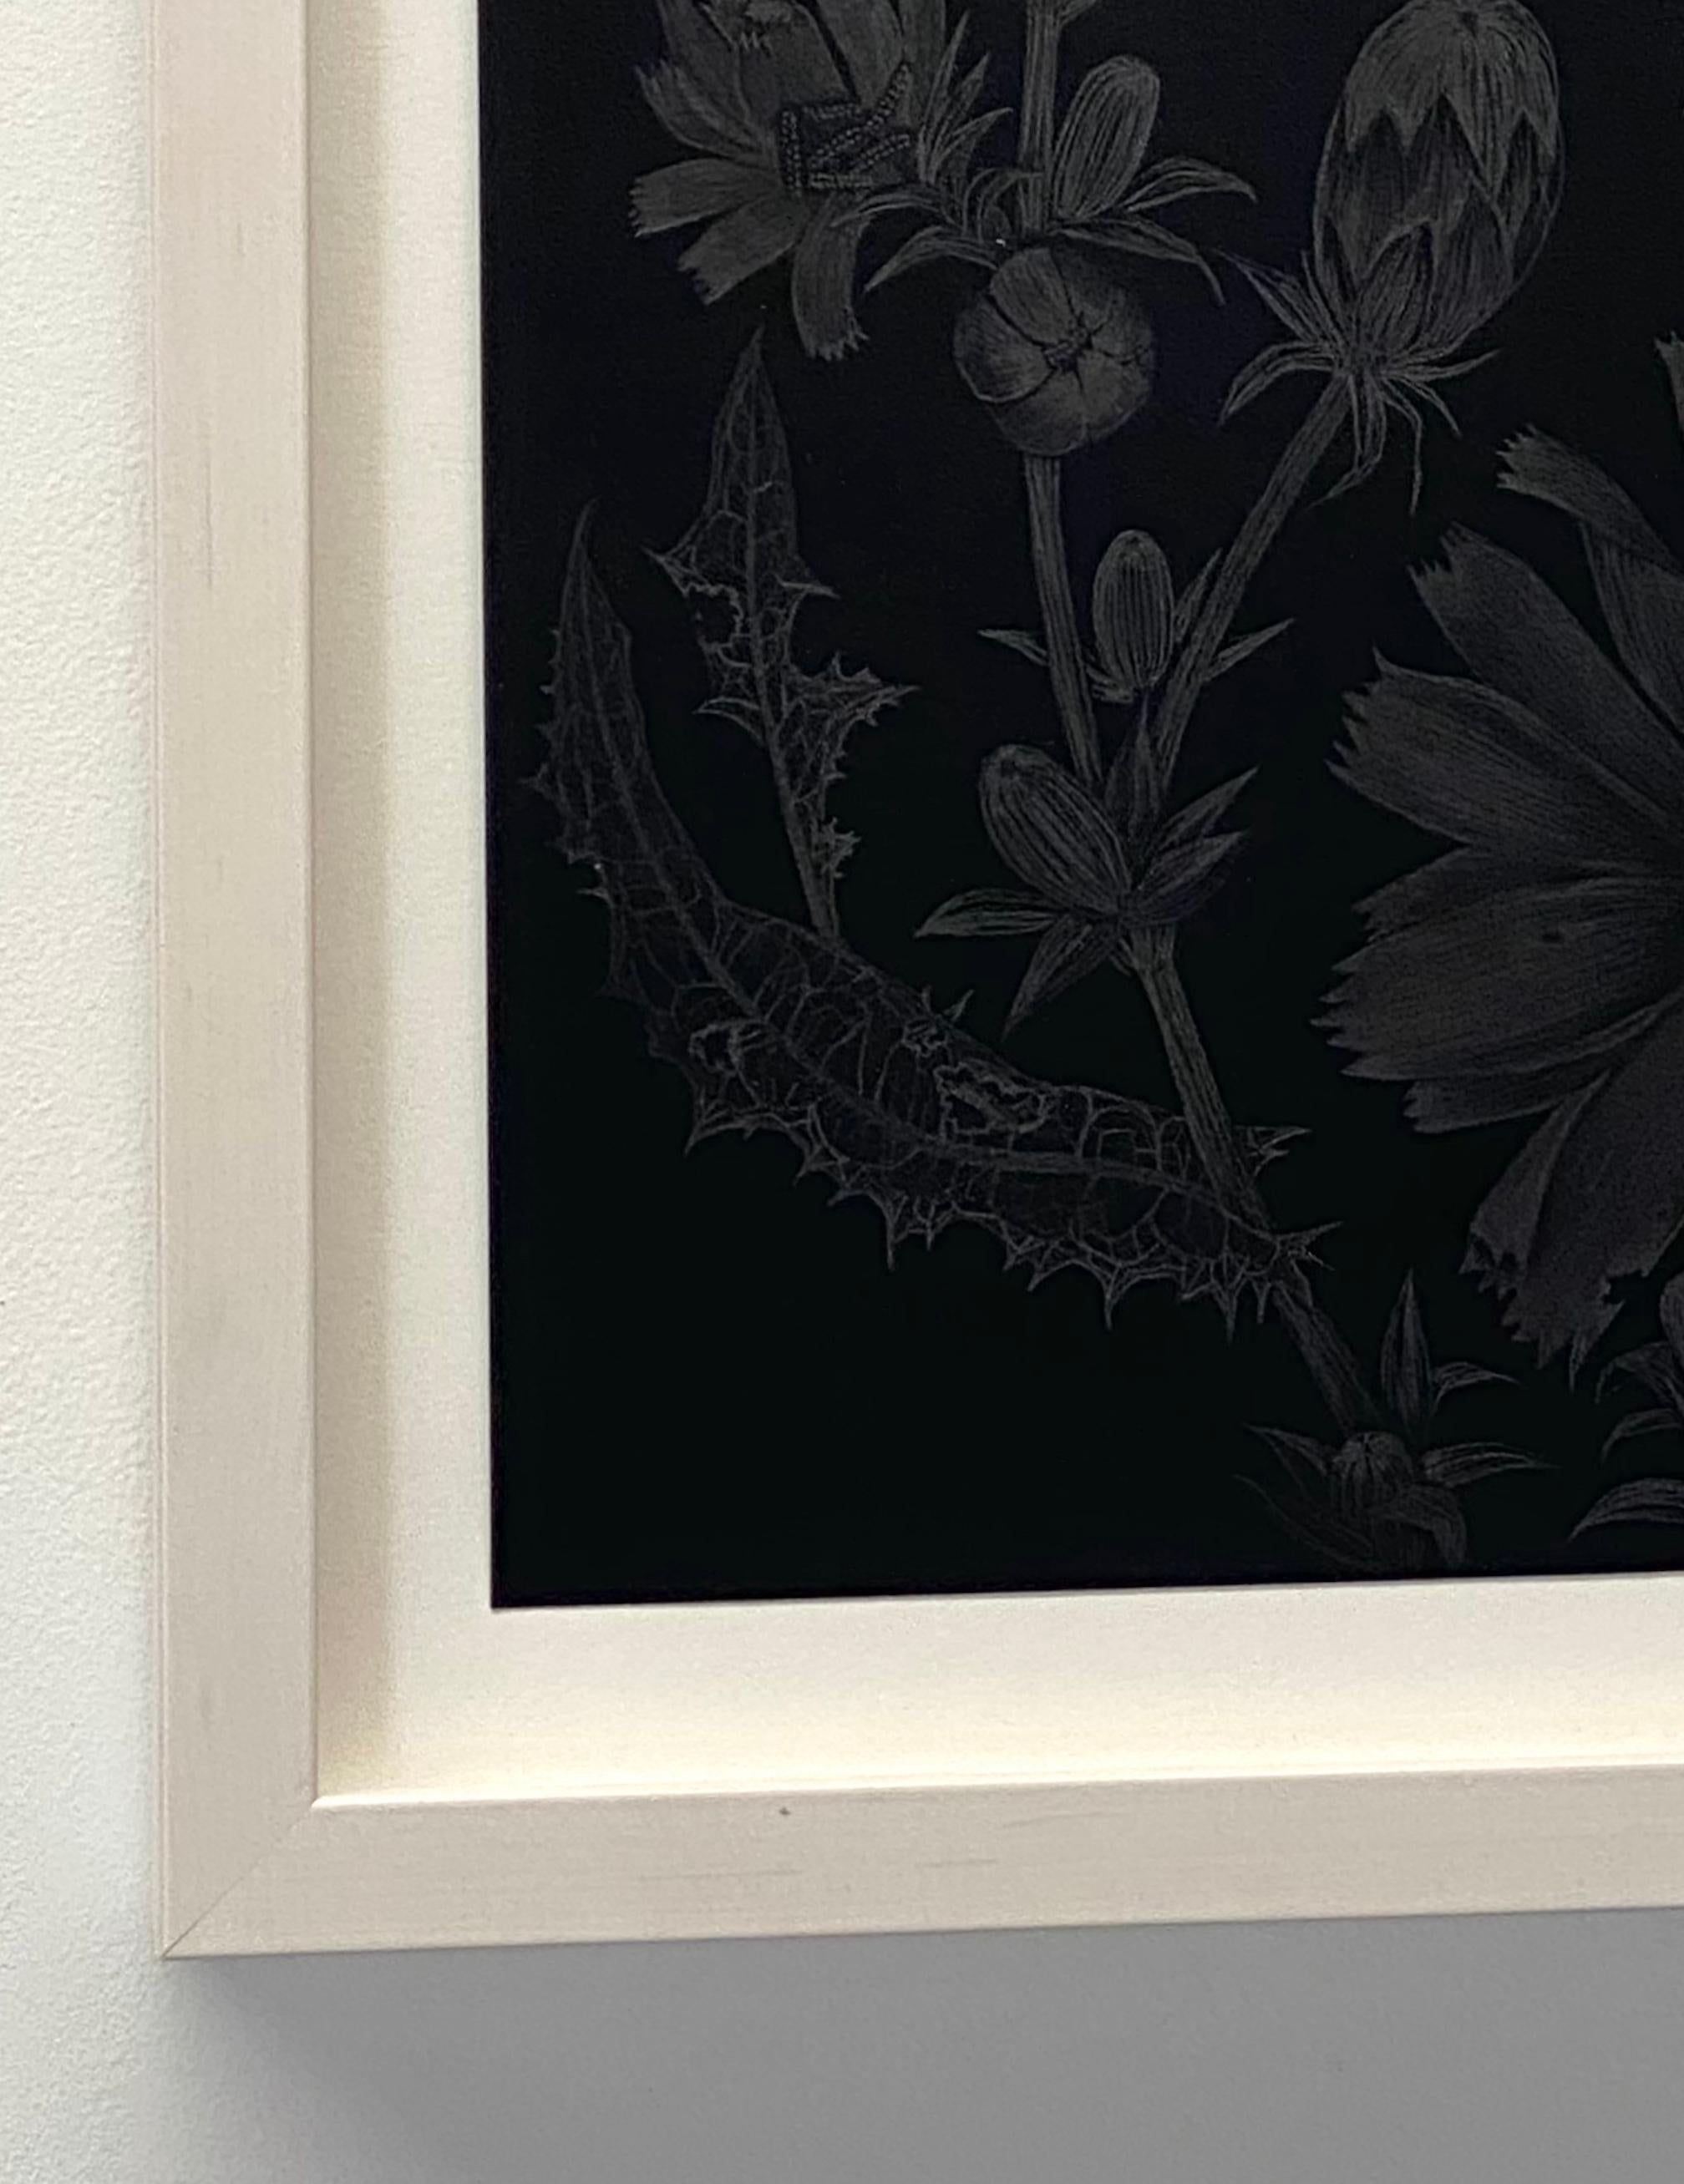 Chicory Two, Botanical Drawing on Black, Metallic Silver Flowers, Leaves, Buds - Contemporary Art by Margot Glass